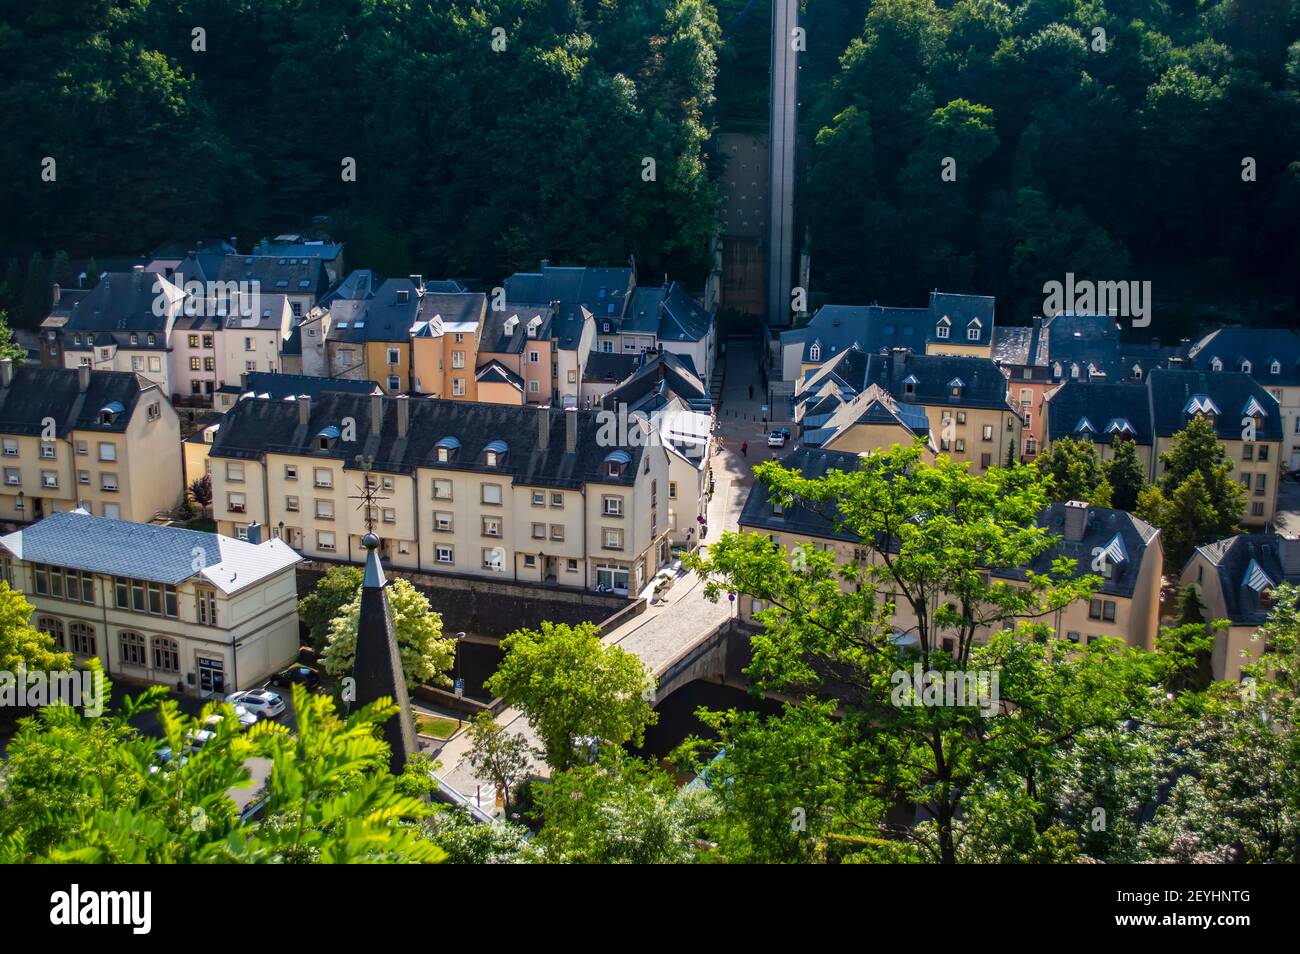 Luxembourg city, Luxembourg - July 15, 2019: Typical houses with grey roofs in the Old Town of Luxembourg city in Europe Stock Photo